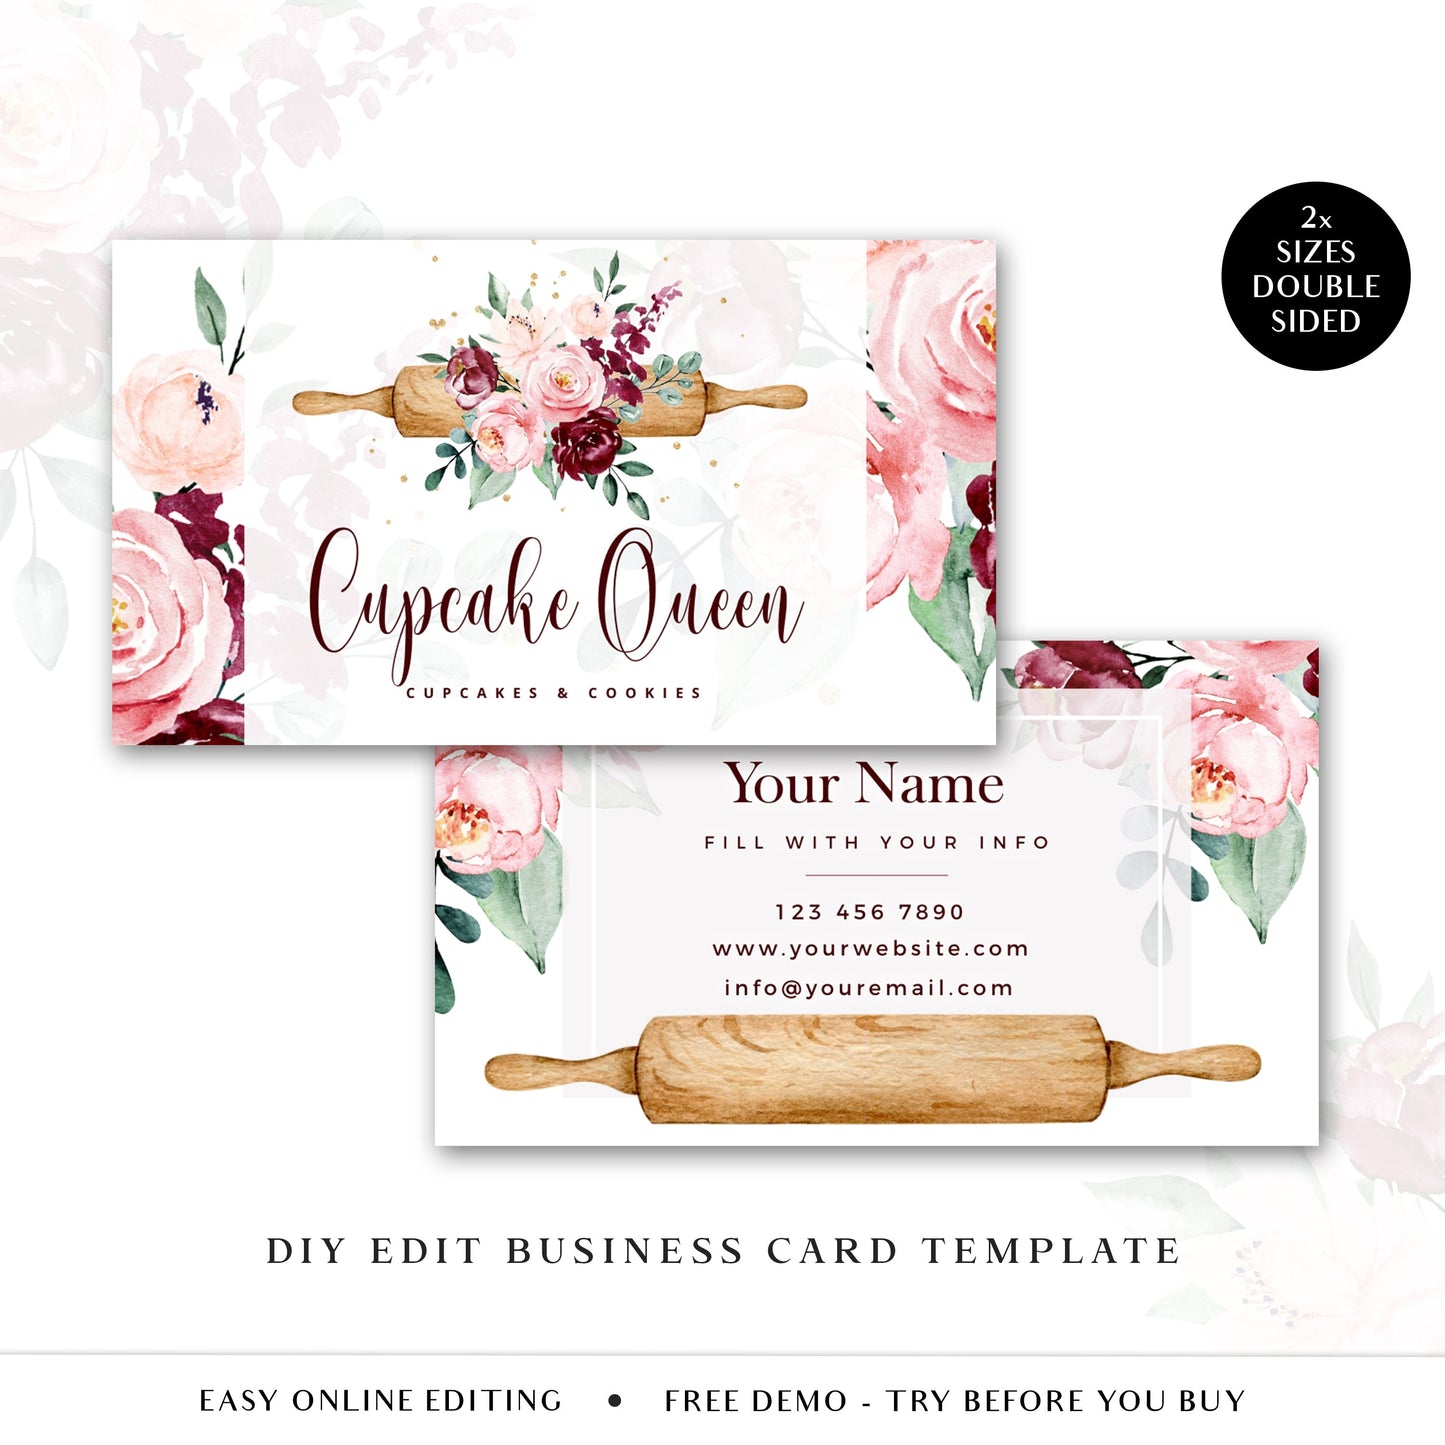 Bakery Business Card Editable Template, DIY Edit Baker Business Card, Premade Cake Maker Business Card, Red and Gold Customizable - CQ-001